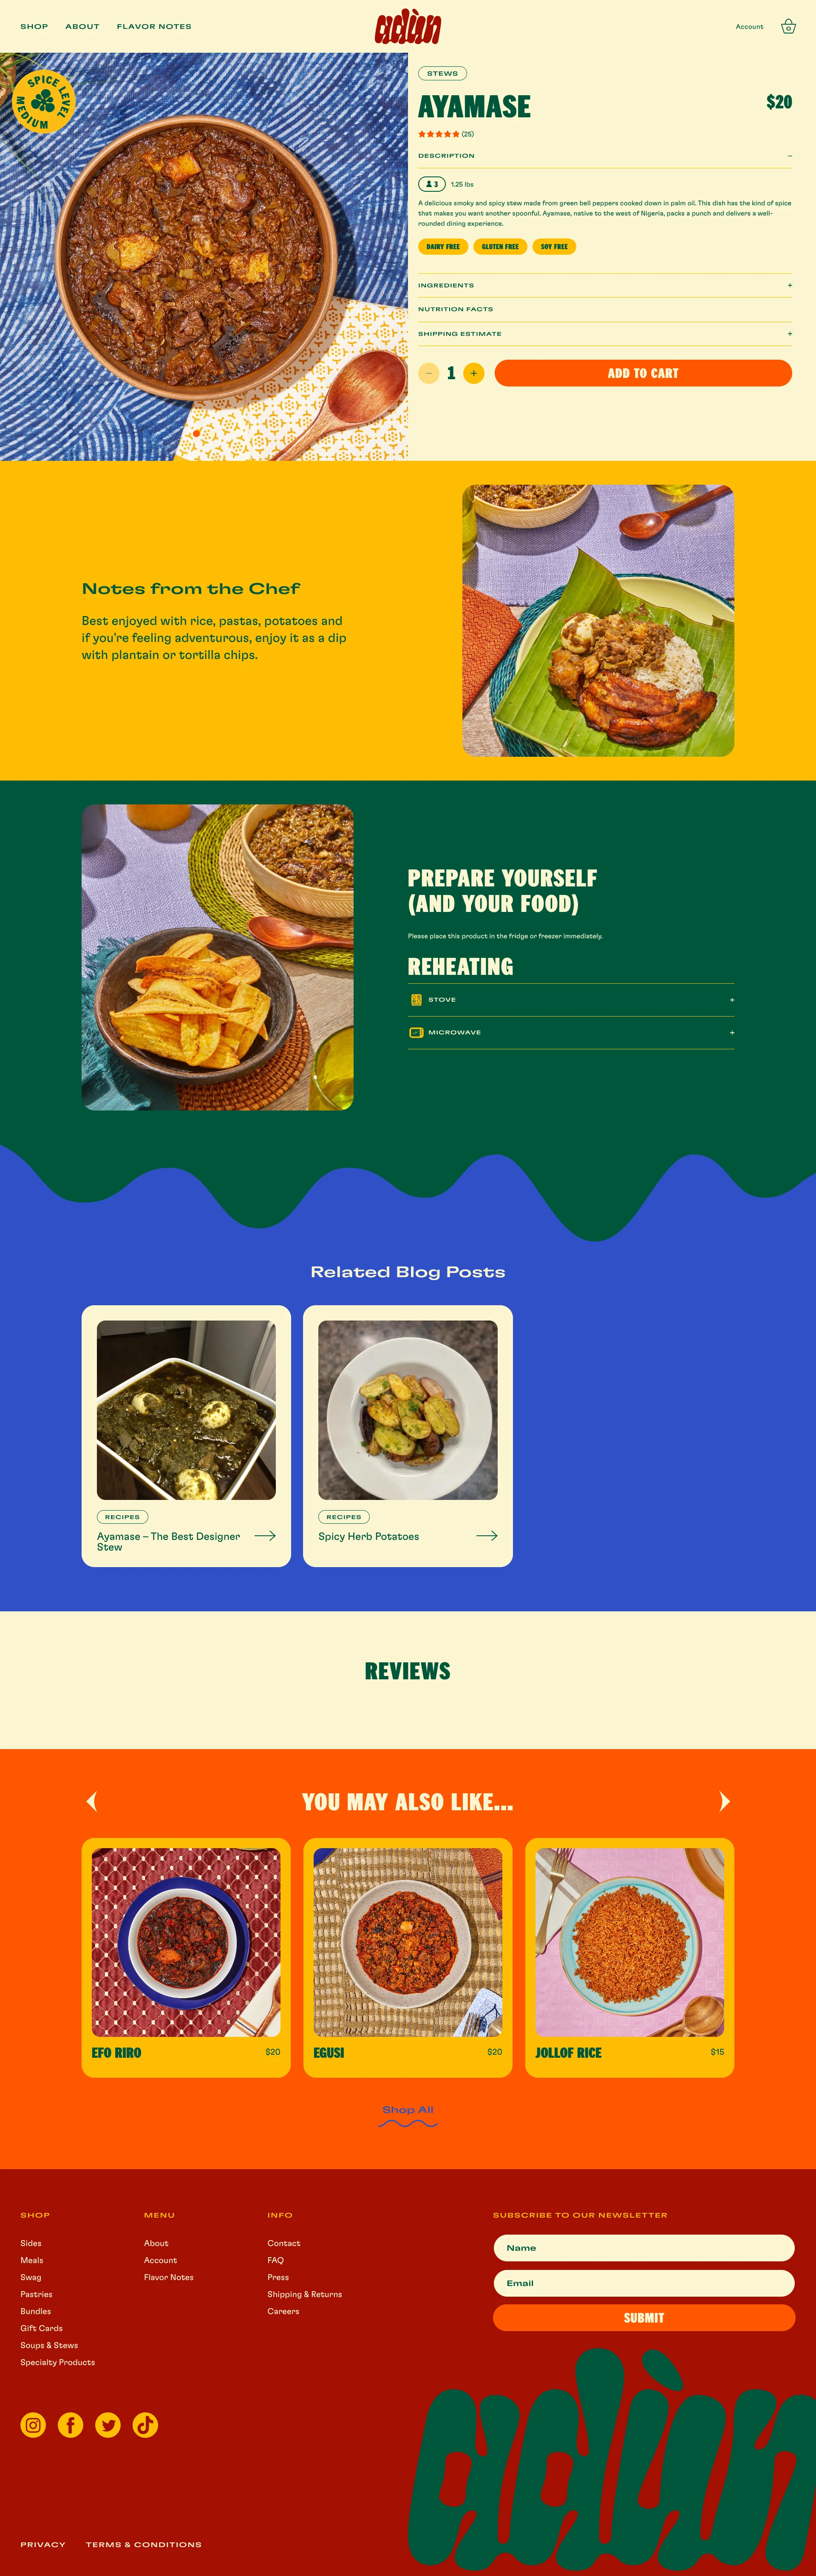 Adùn Landing Page Example: Adùn brings African flavors from our kitchen to your table. Classic Recipes and Fresh Takes, Made for You. Try our ready-in-minutes frozen meals.